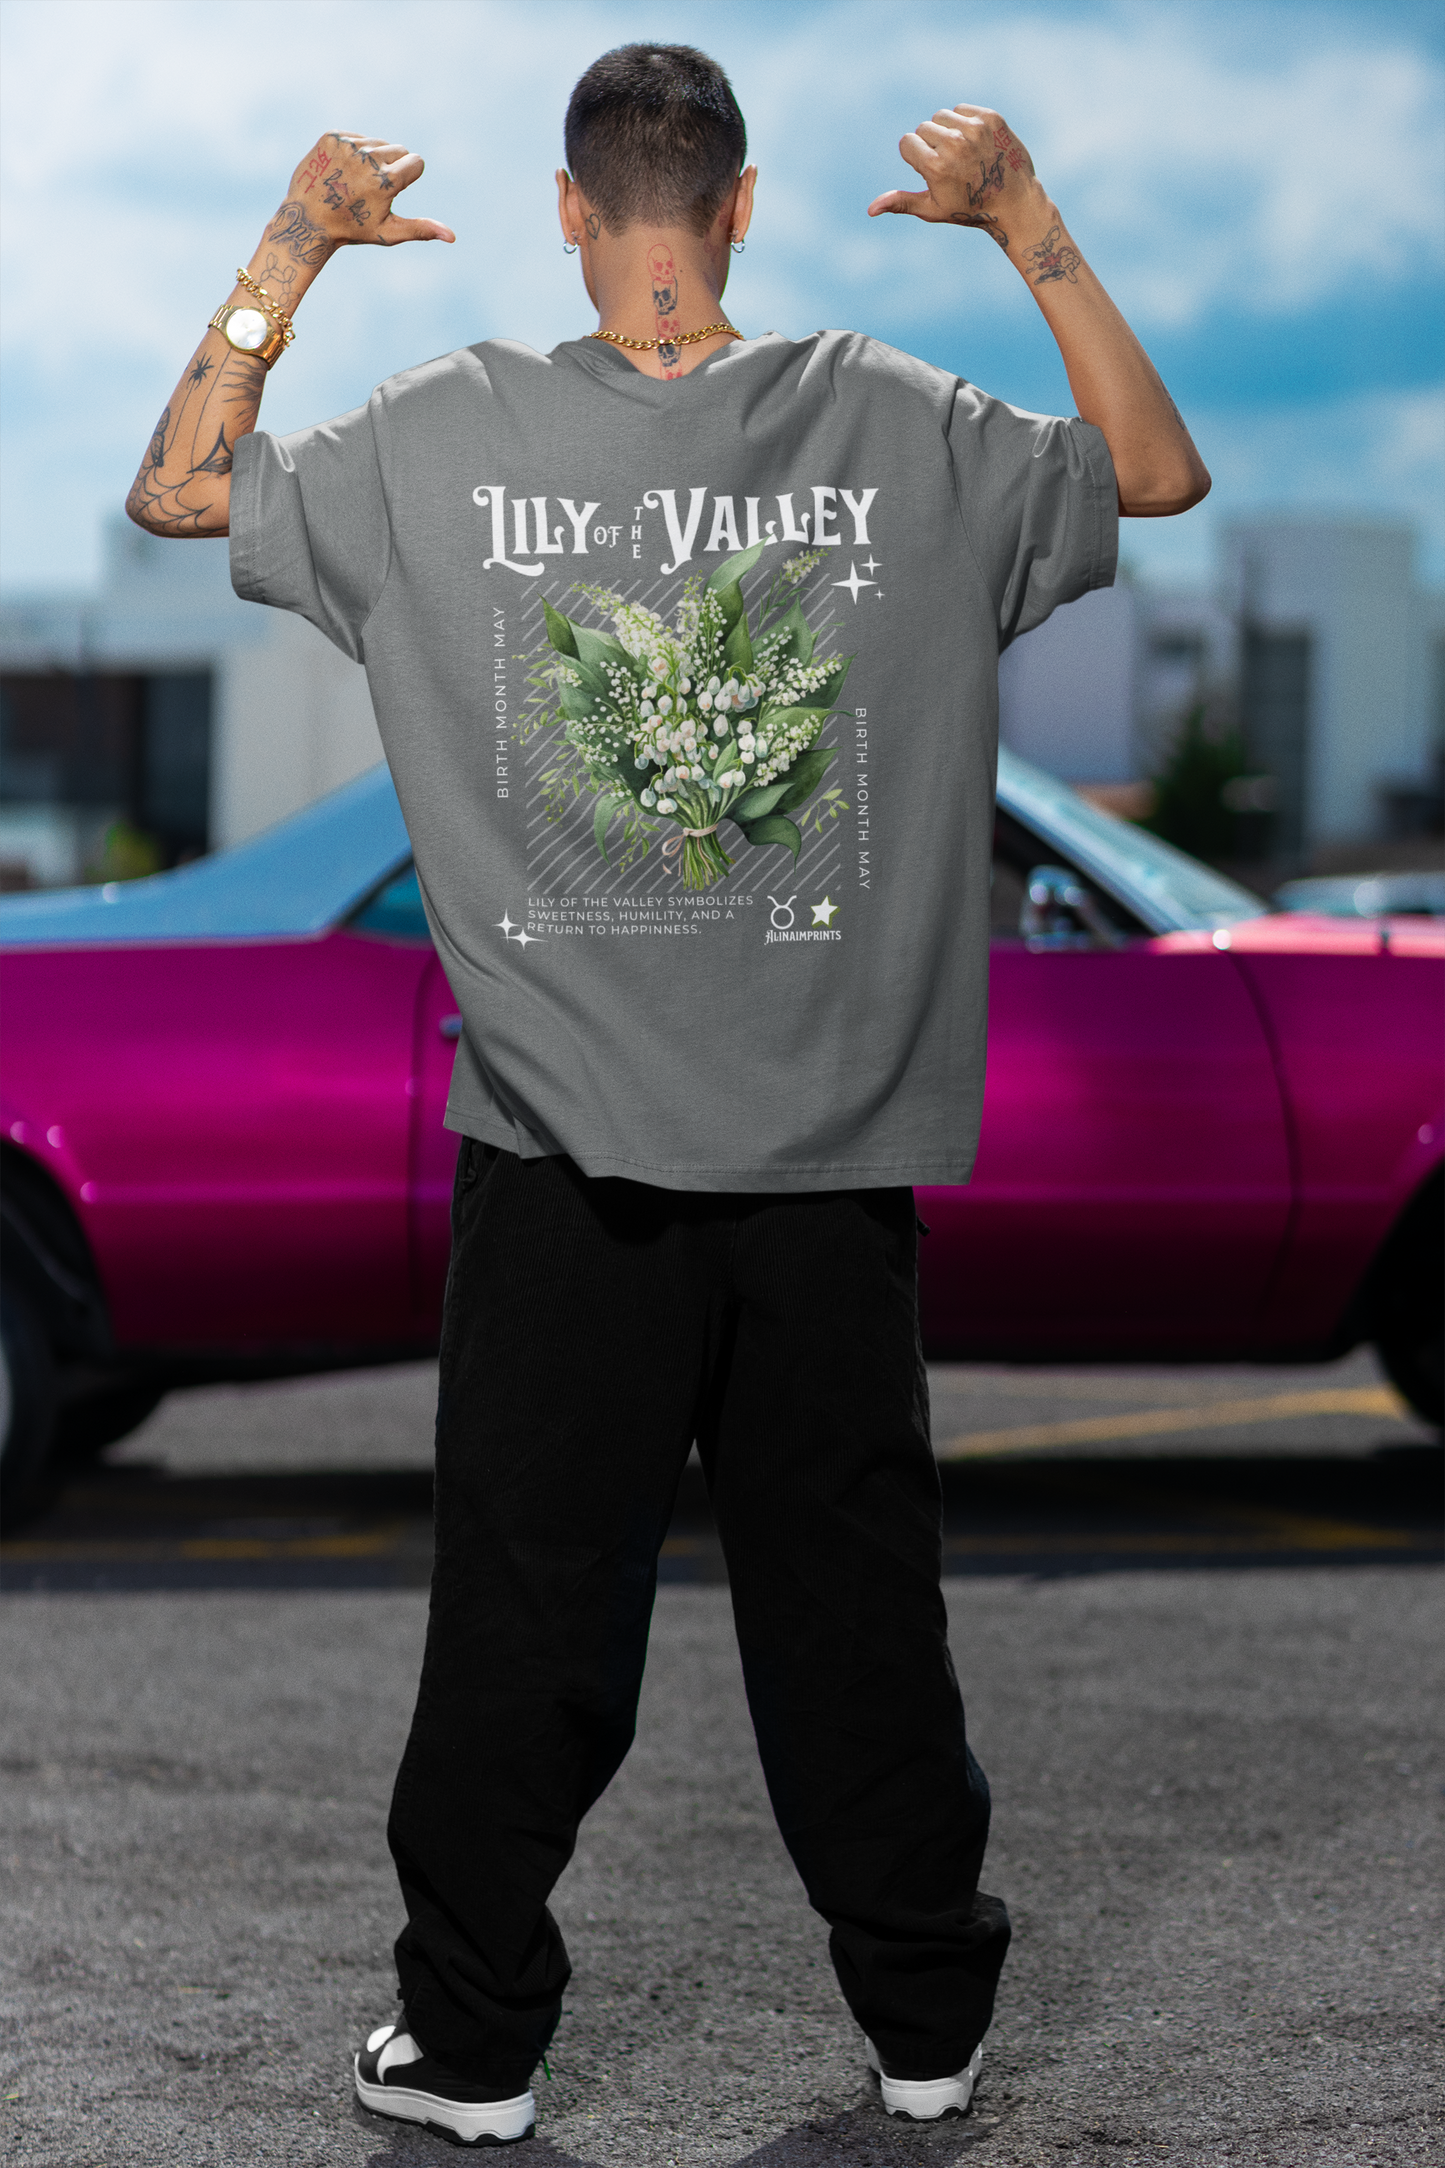 Lily of the Valley, birth month May flower Heavyweight Unisex Crewneck T-shirt